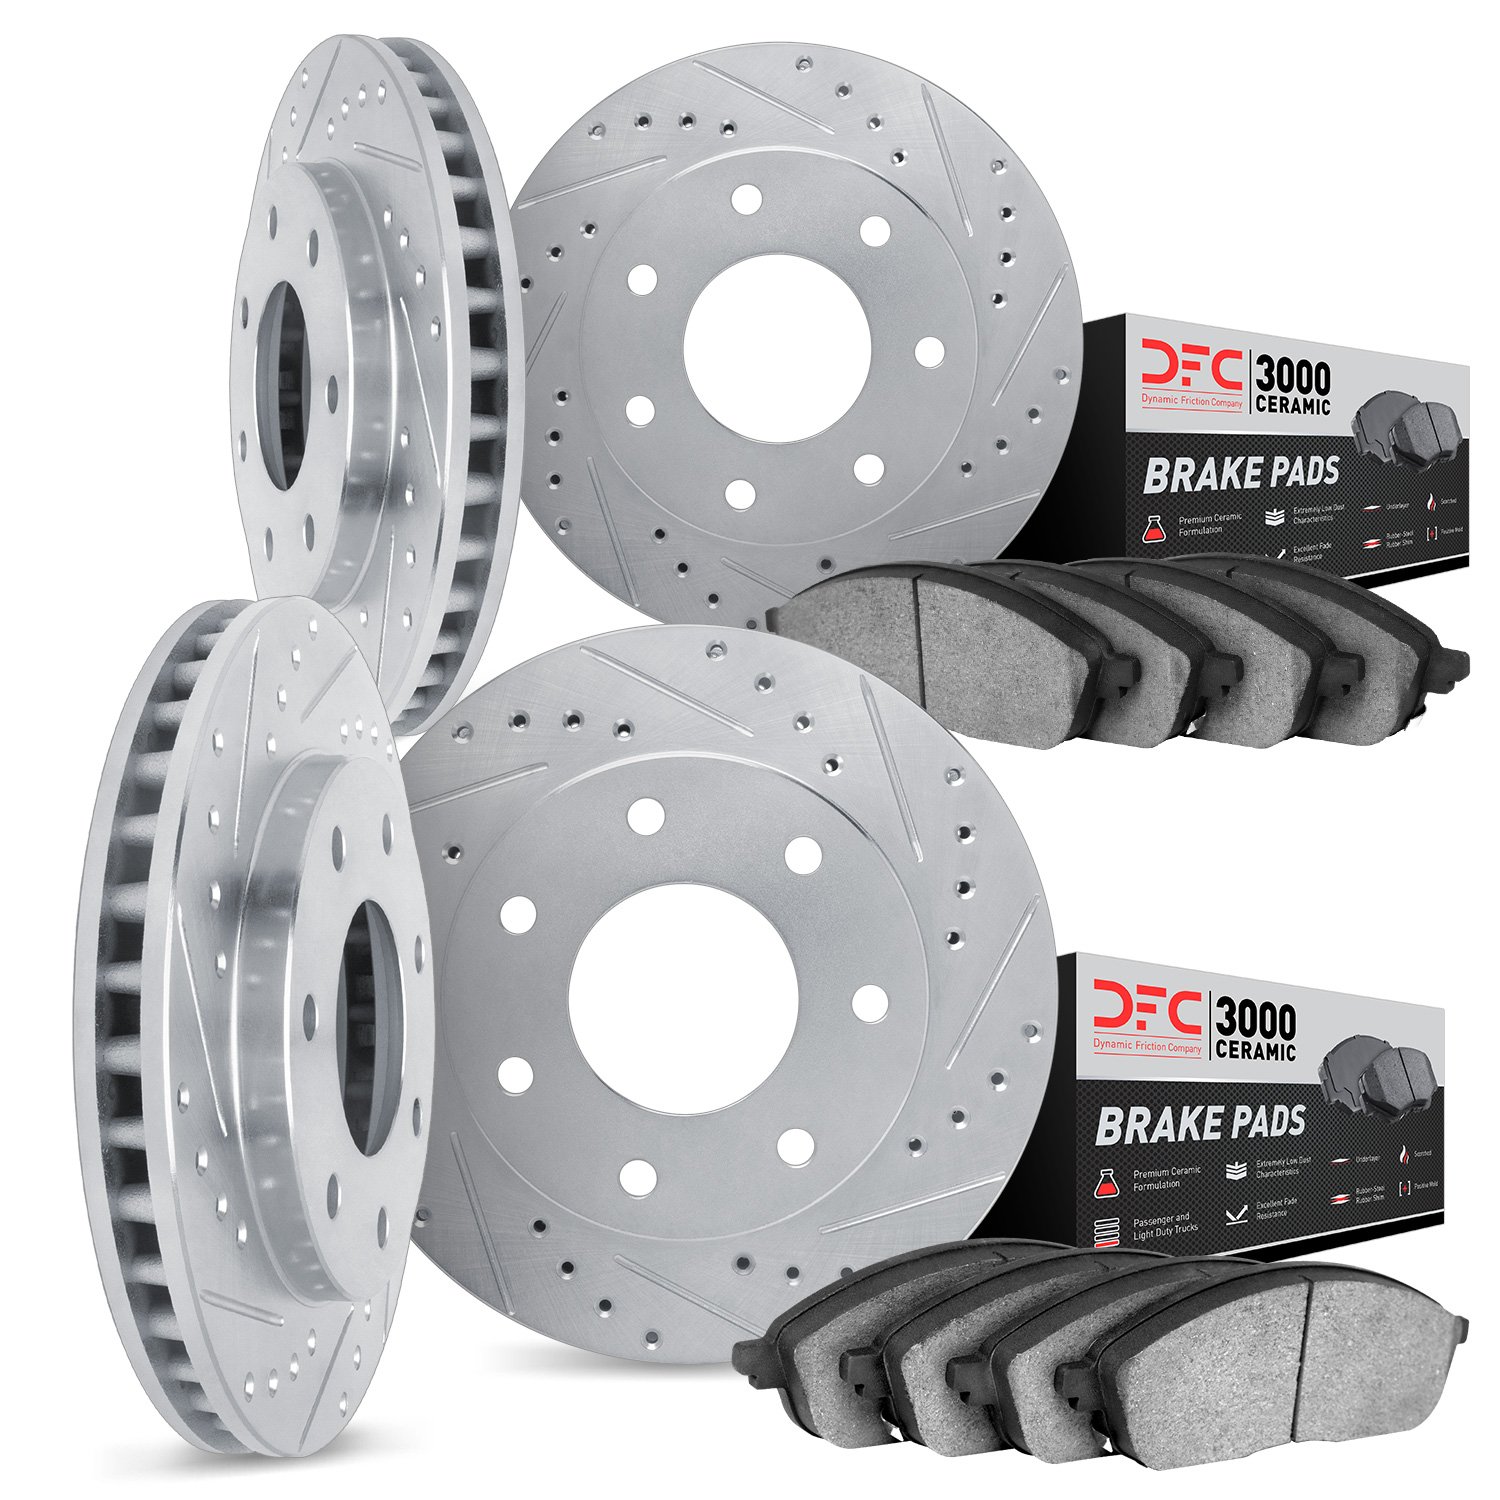 7304-54068 Drilled/Slotted Brake Rotor with 3000-Series Ceramic Brake Pads Kit [Silver], 2009-2009 Ford/Lincoln/Mercury/Mazda, P